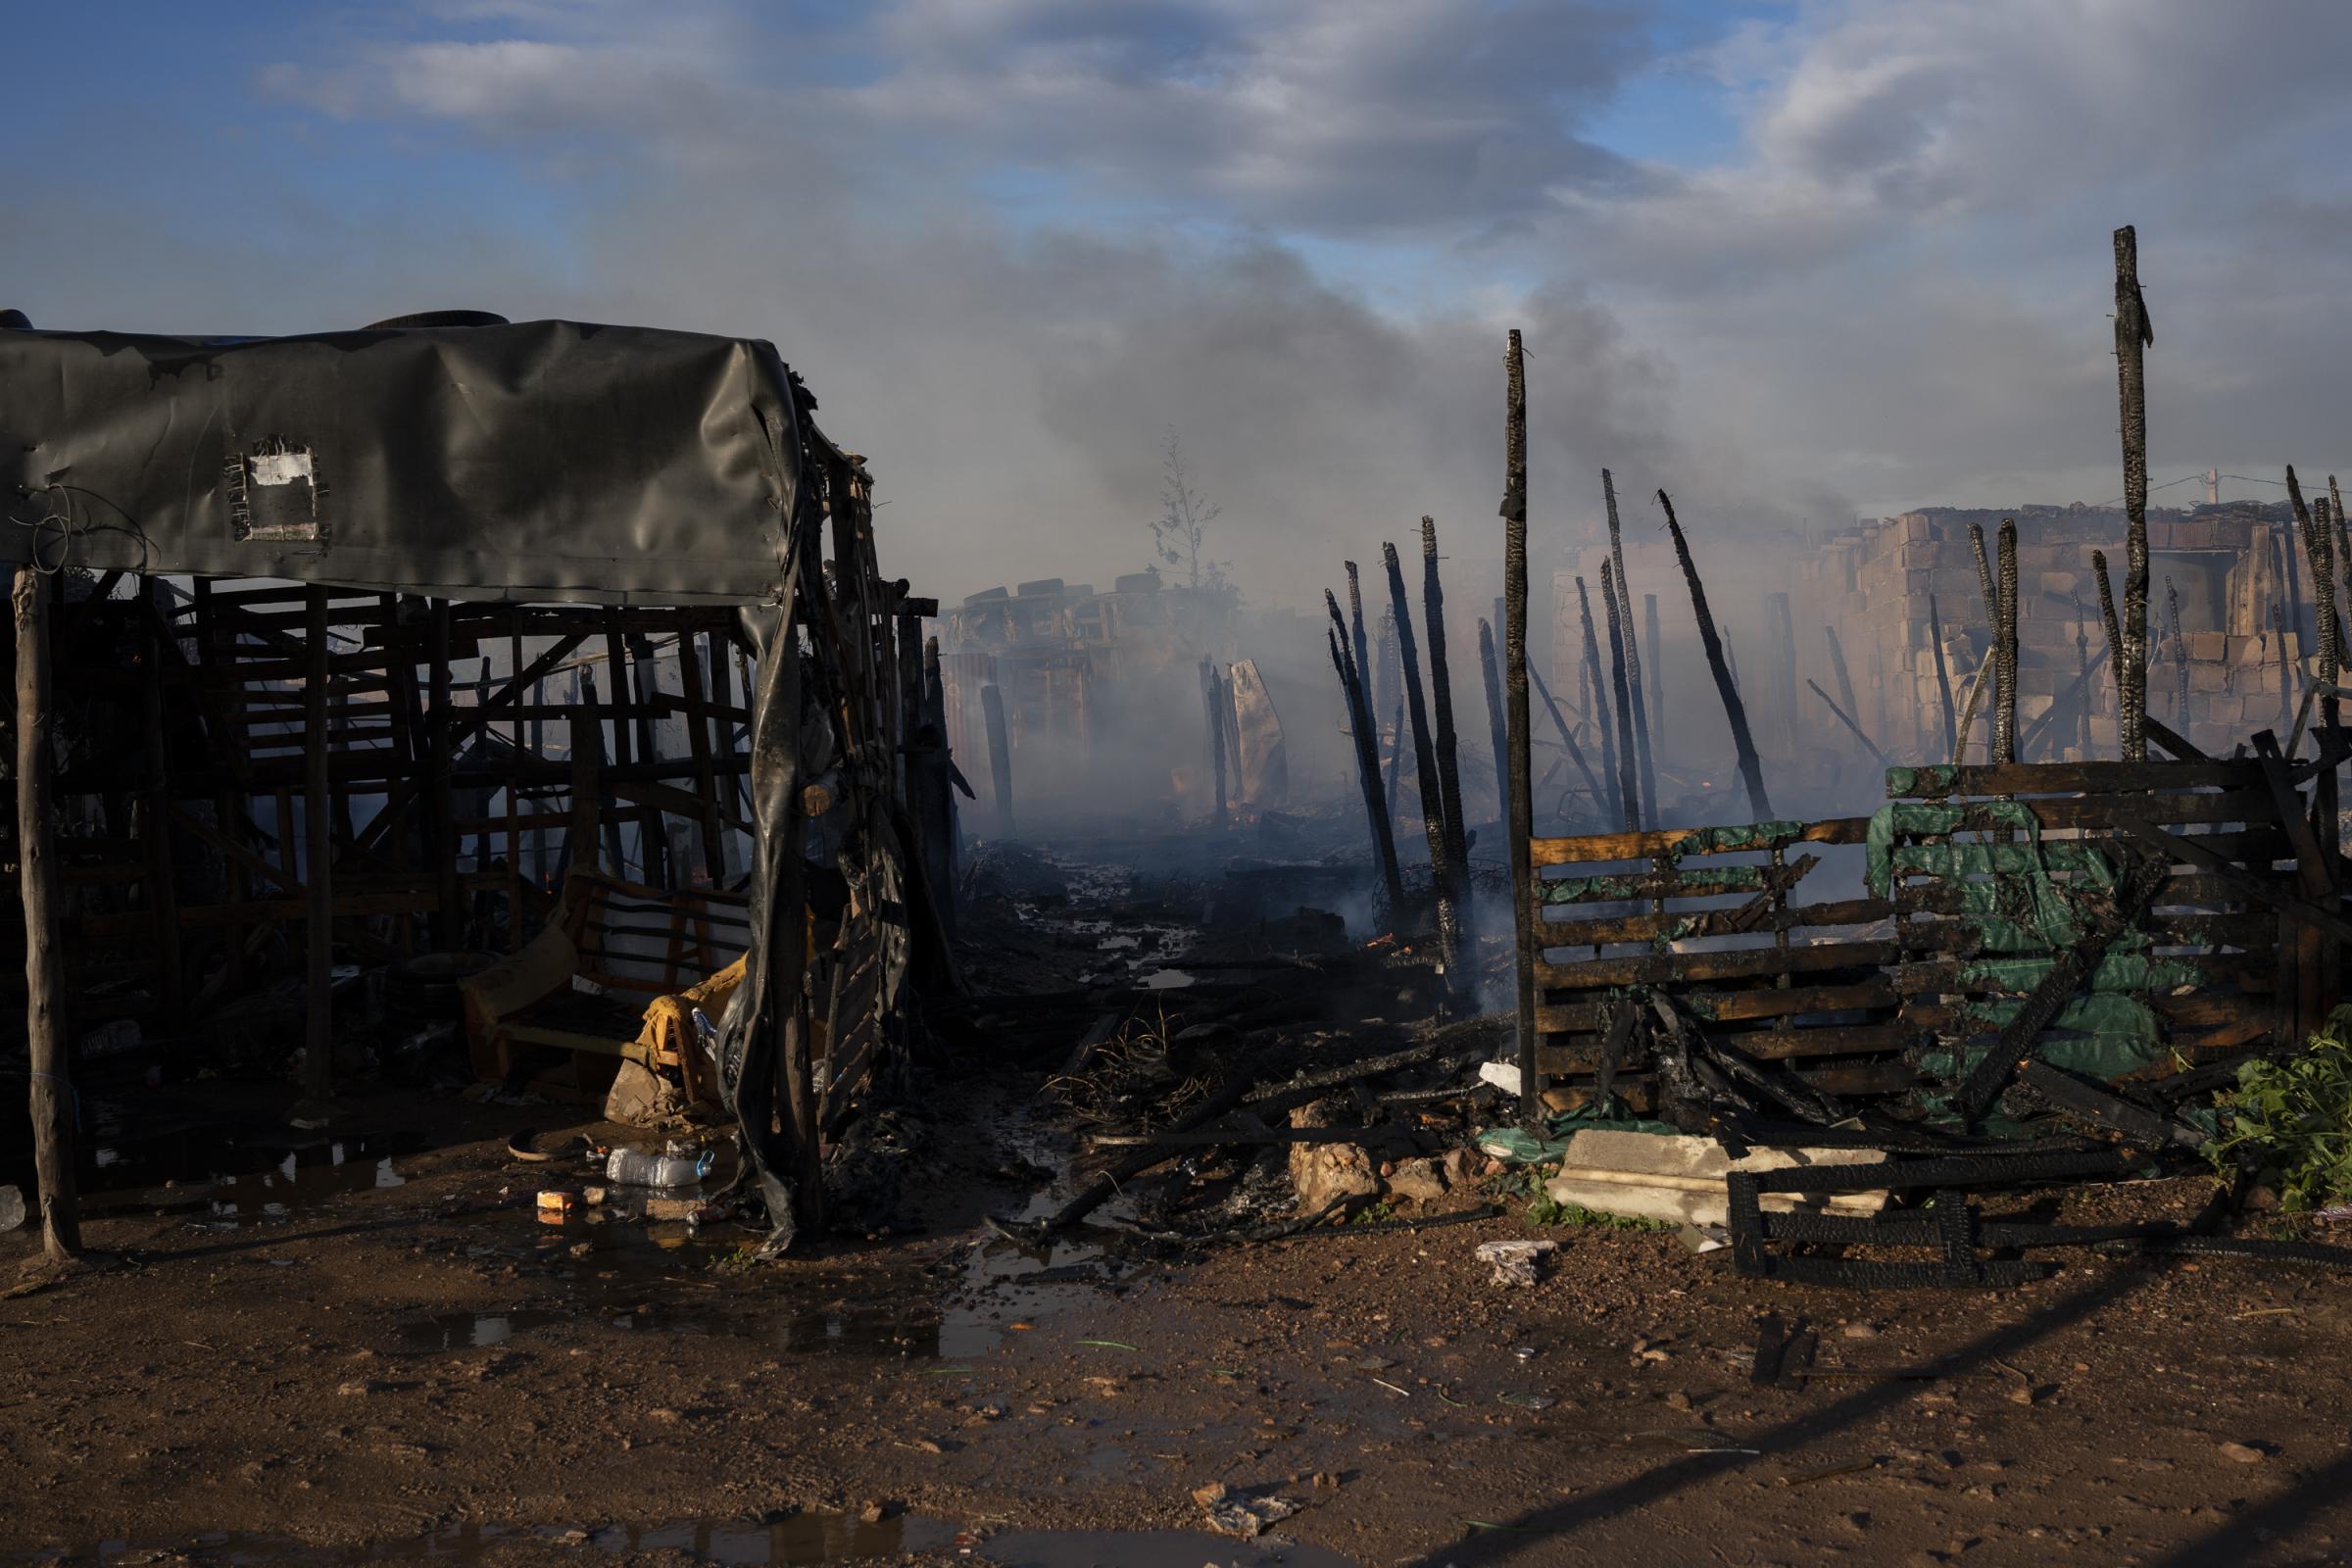 200 people evacuated as fire engulfs migrant camp in Spain